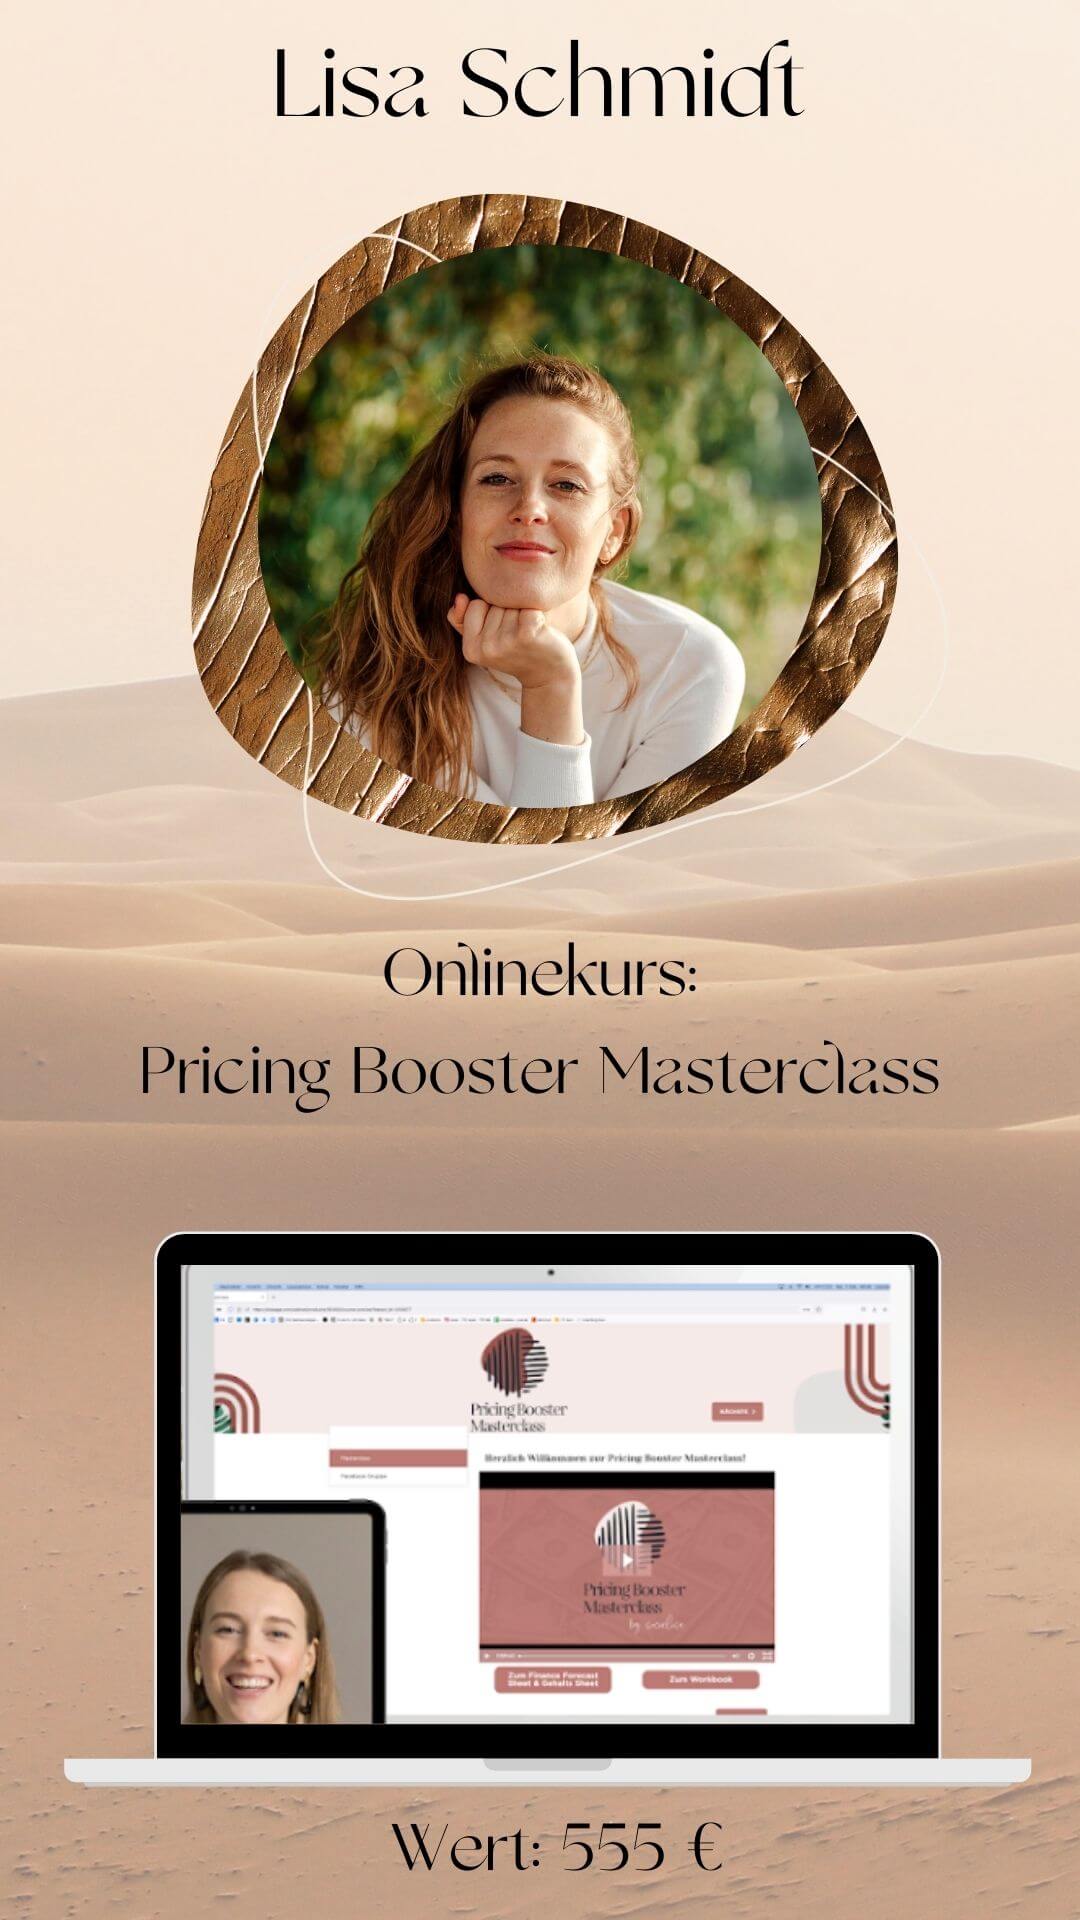 Pricing Booster Masterclass